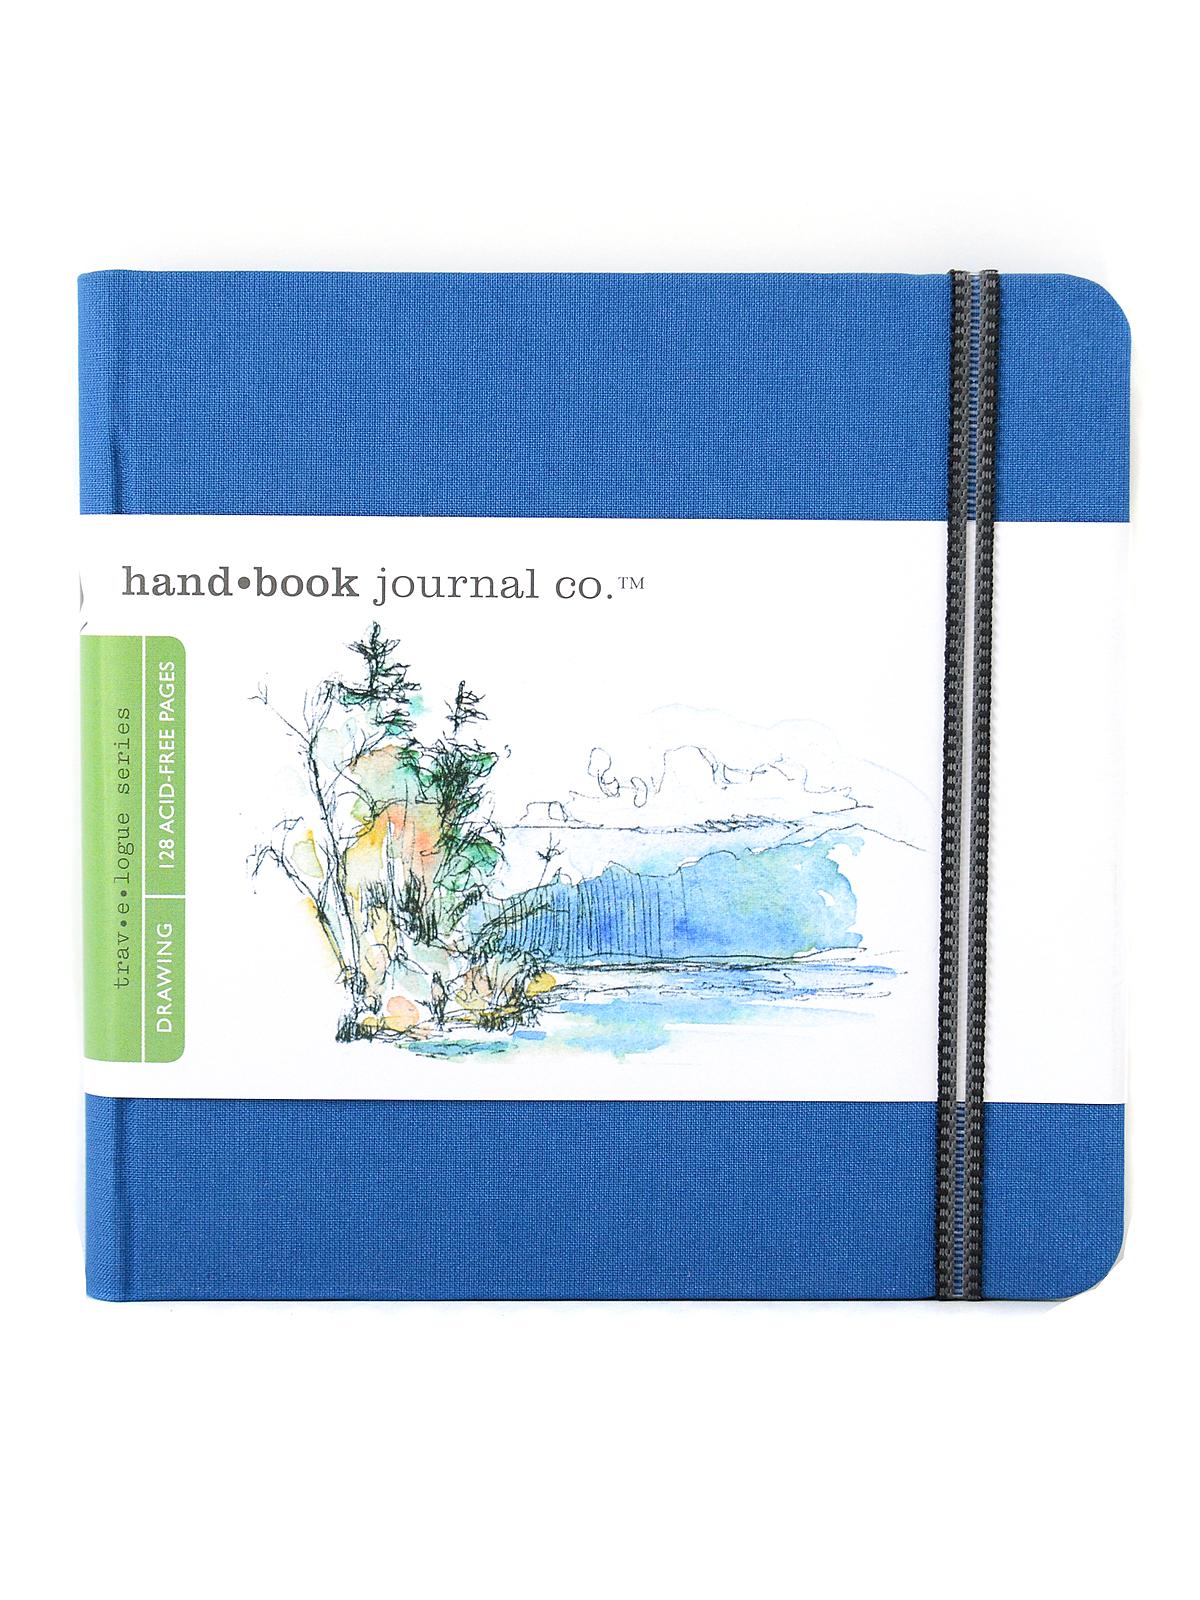 Travelogue Drawing Journals 5 1 2 In. X 5 1 2 In. Square Ultramarine Blue